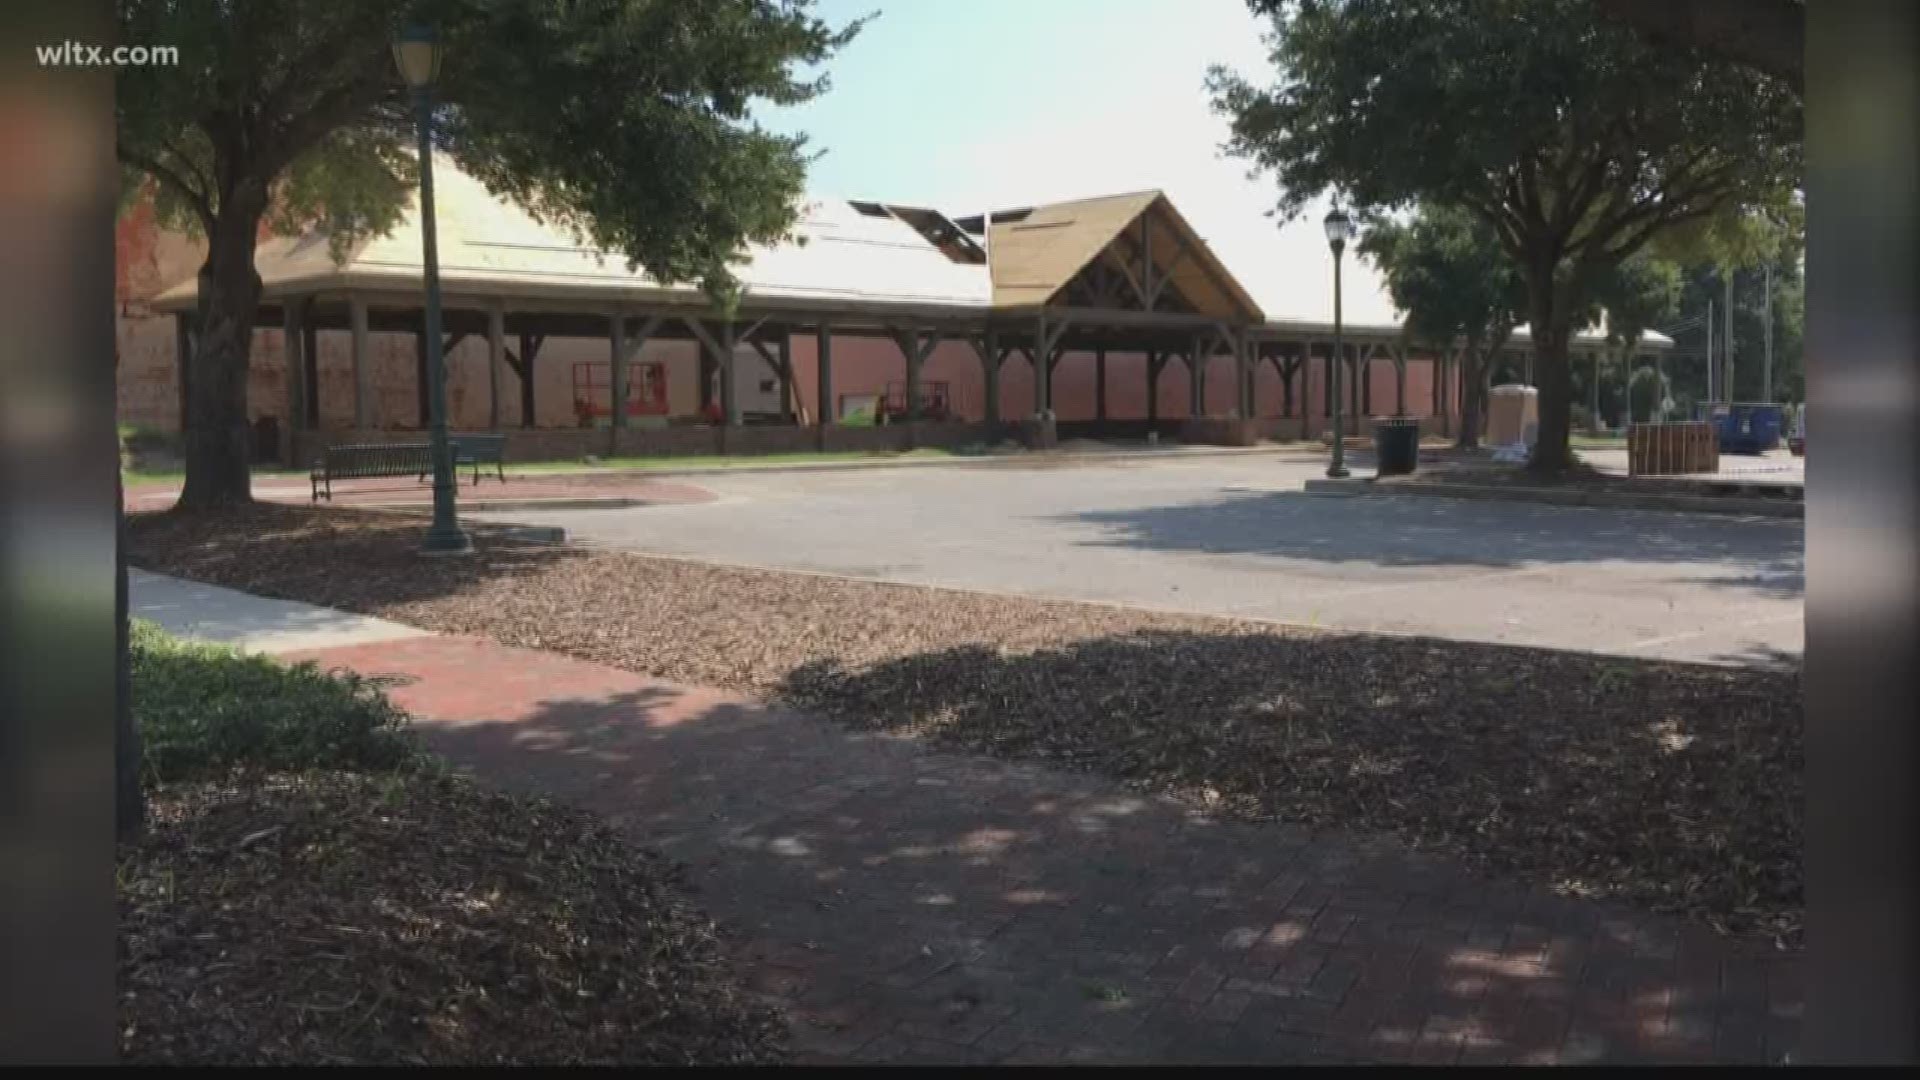 Orangeburg's open air pavilion is scheduled to open in the late fall of 2019